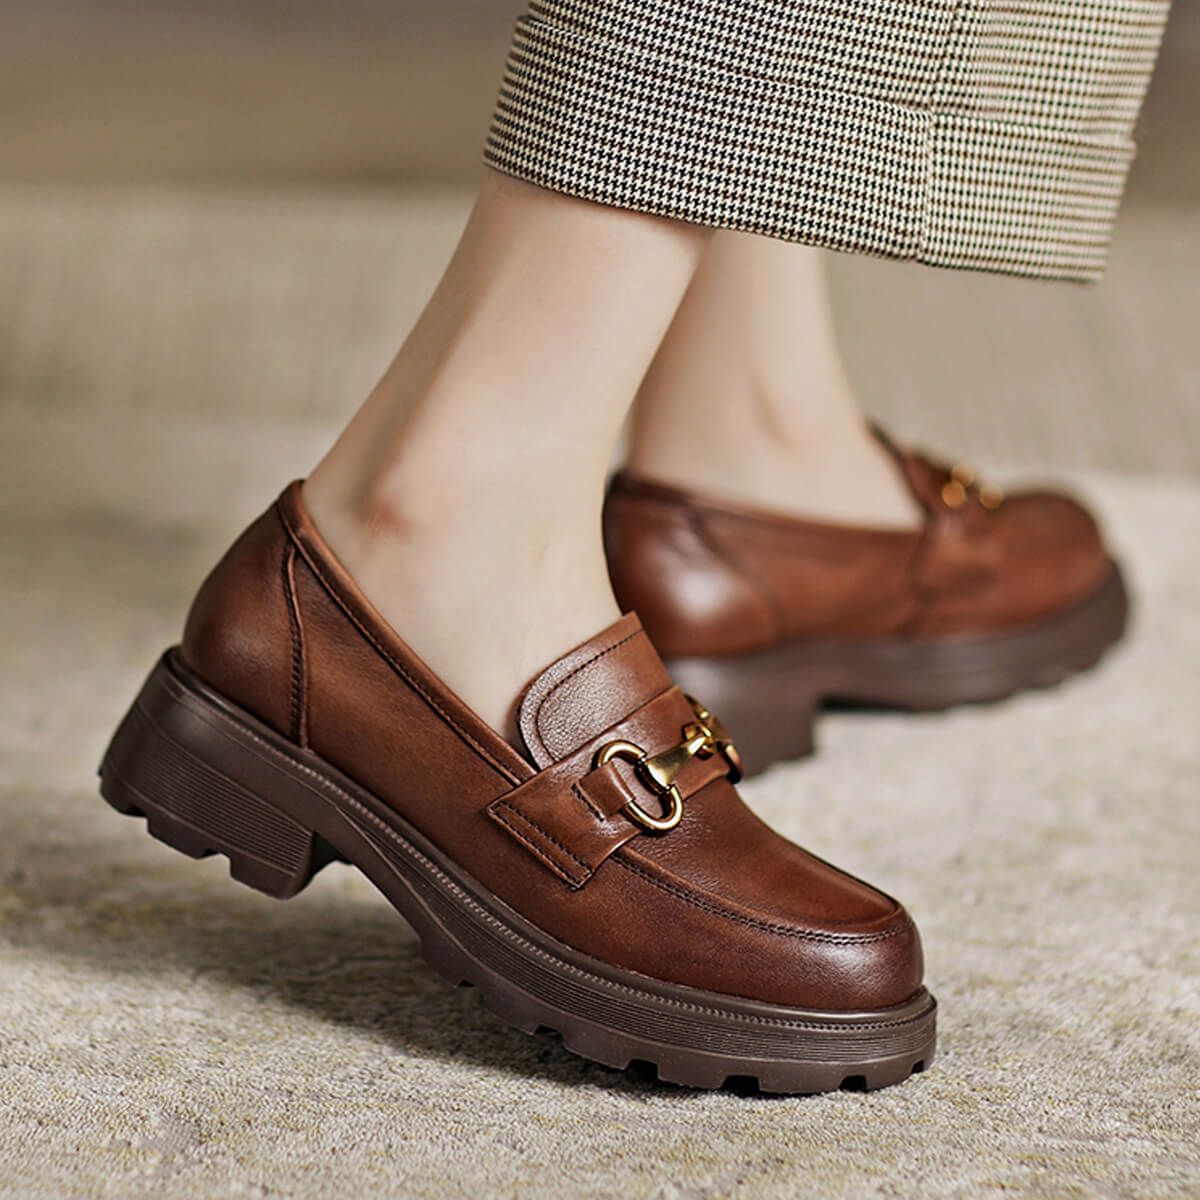 How to Wear Brown Loafers: 15 Artistic & Stylish Outfit Ideas for Ladies